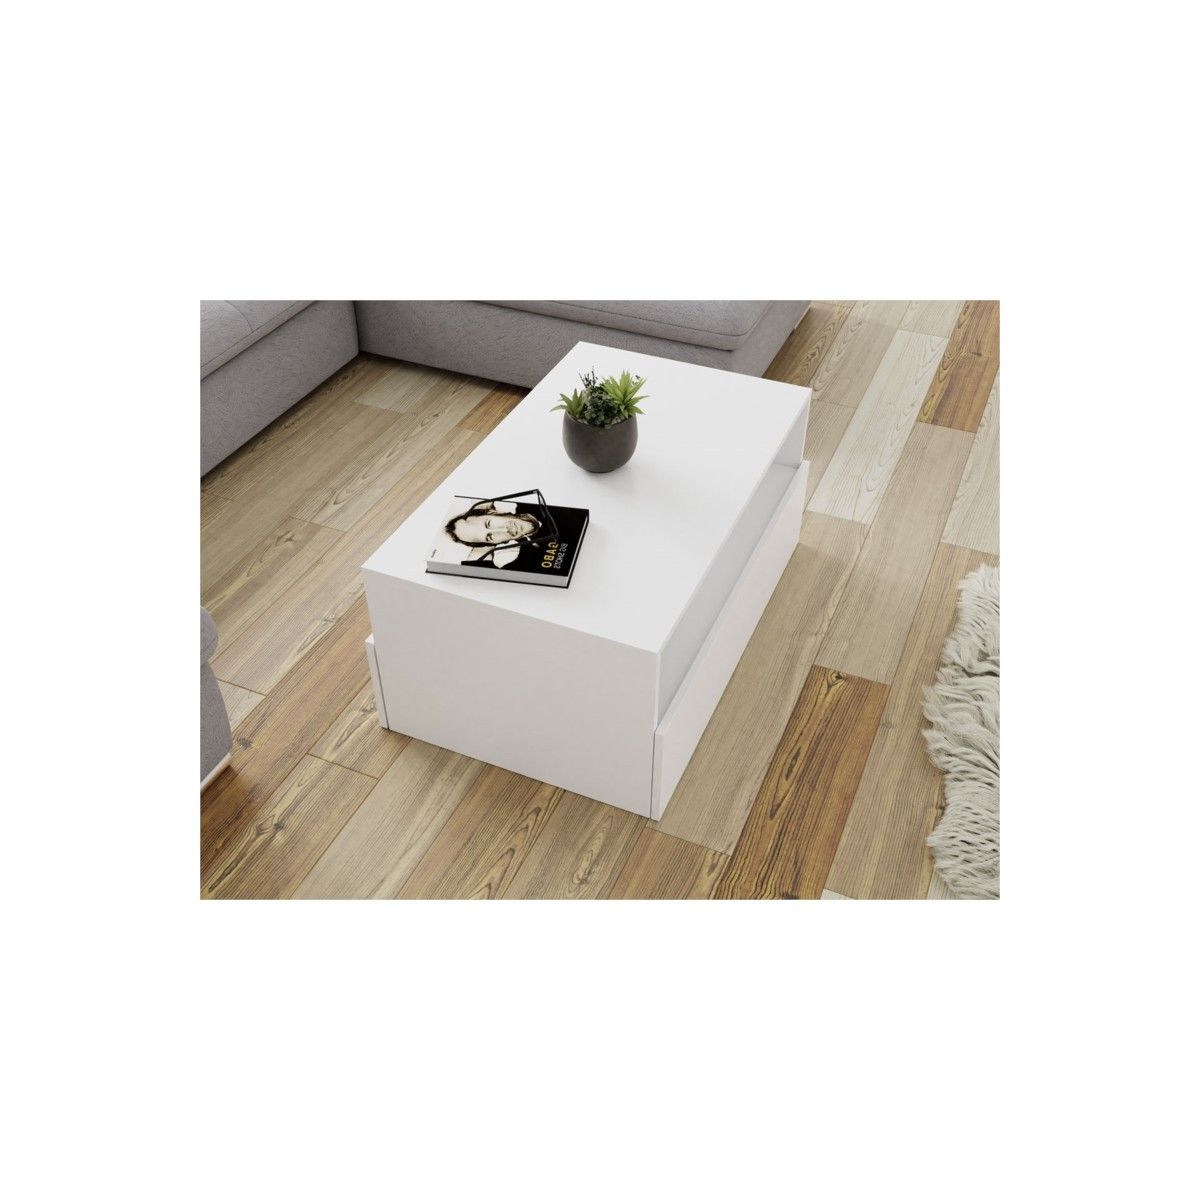 Coffee Table 2 Drawers 90 Cm Drek (white) – Amp Story 8929 Inside Newest 2 Drawer Coffee Tables (View 6 of 20)